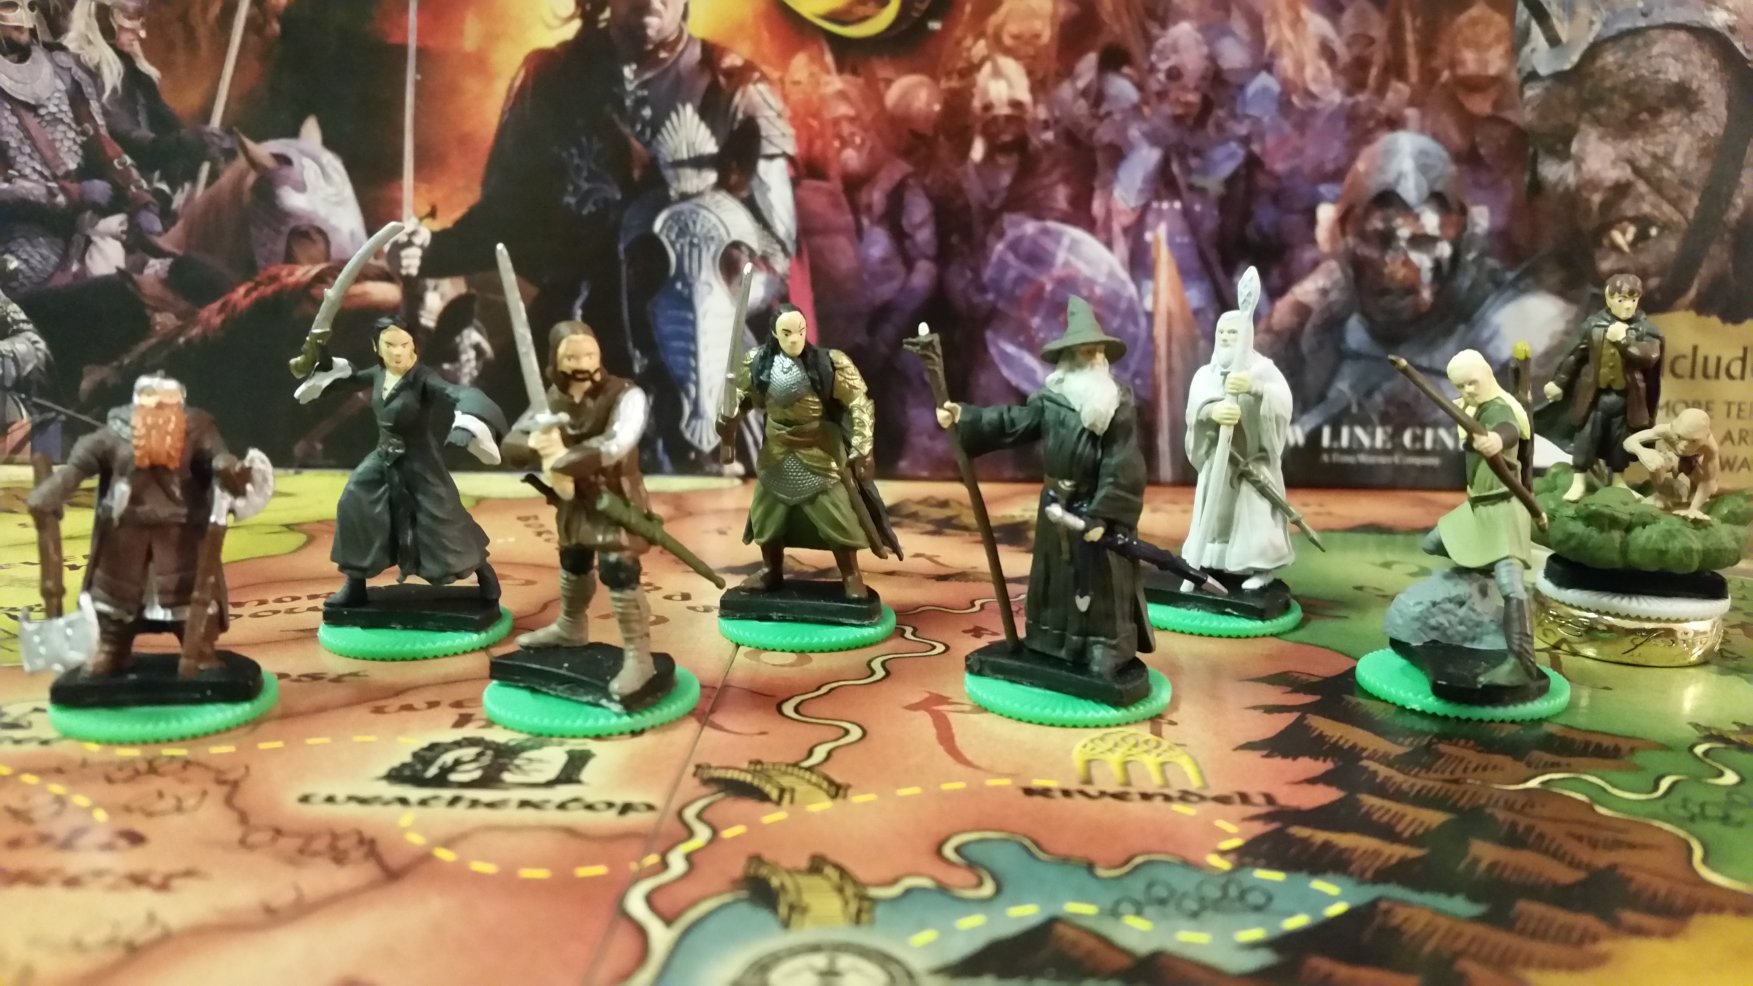 plank Fonetiek Knikken Risk: Lord of the Rings Trilogy Edition | Axis & Allies .org Forums